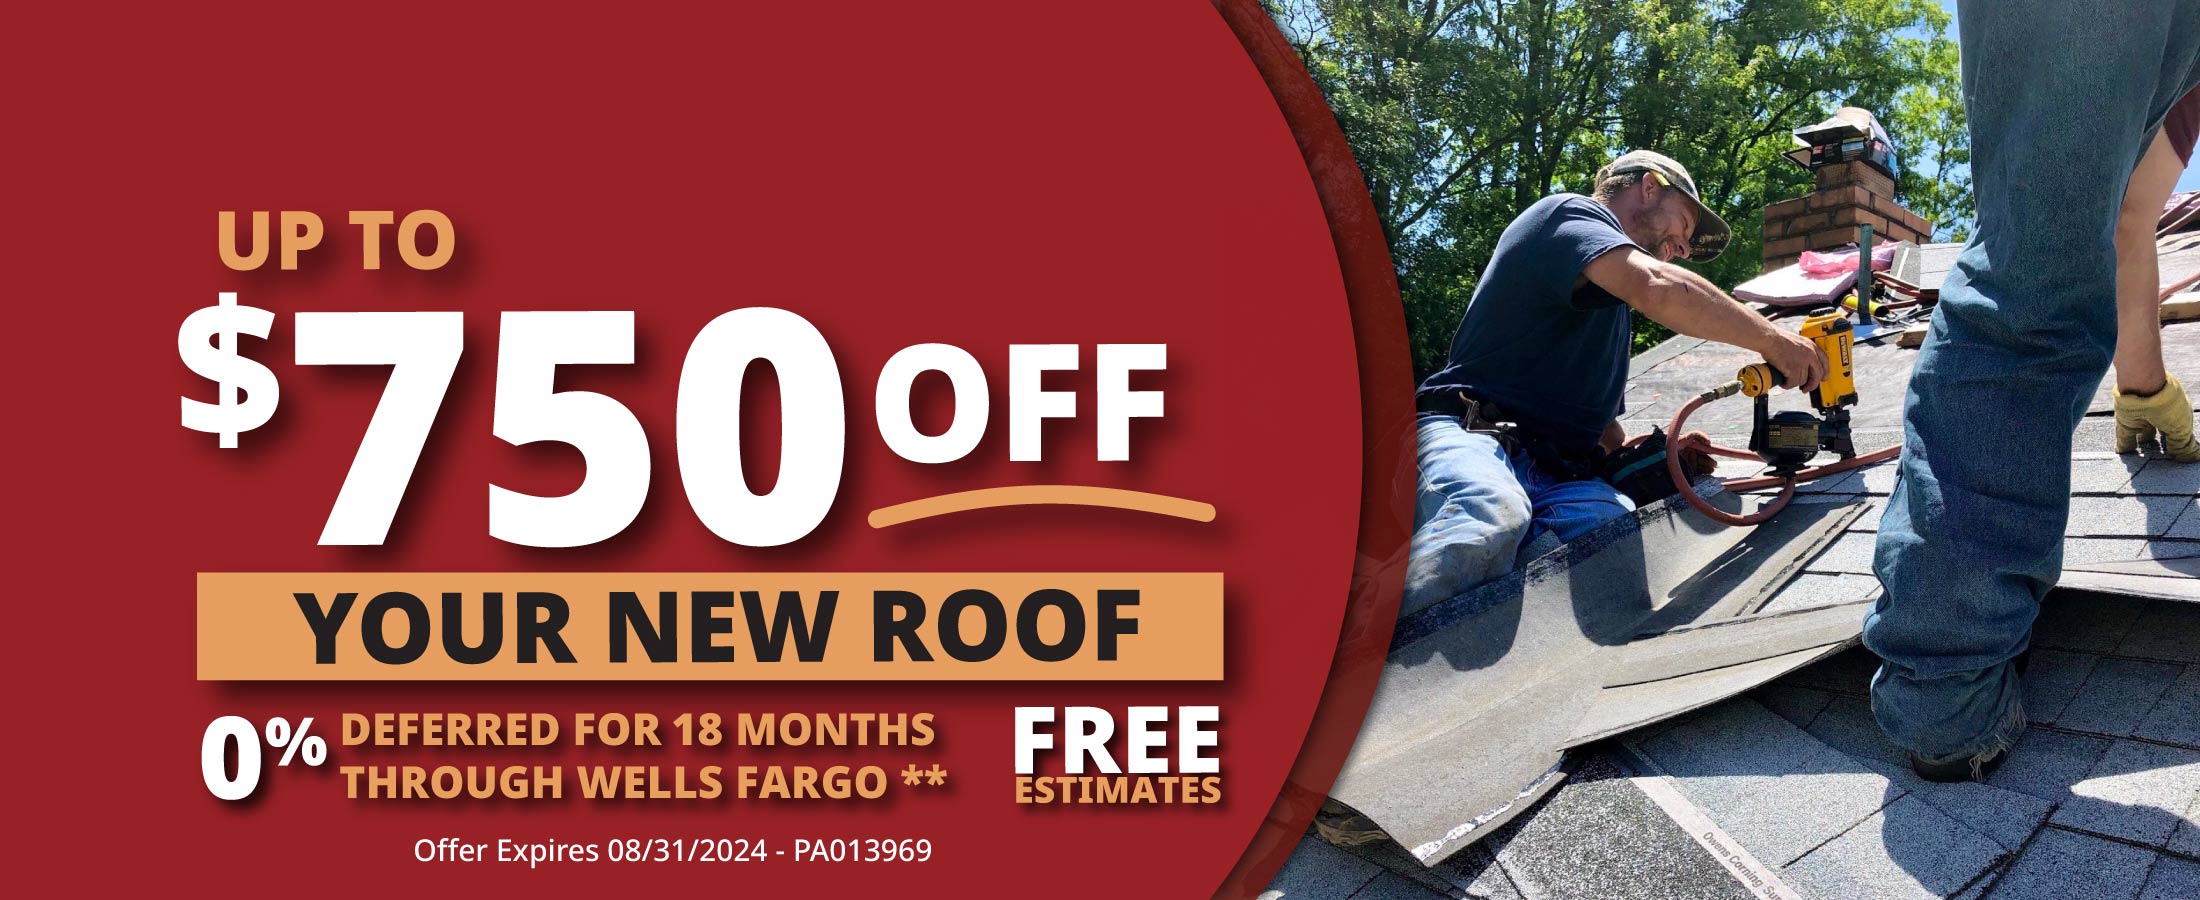 750 off your new roof promo